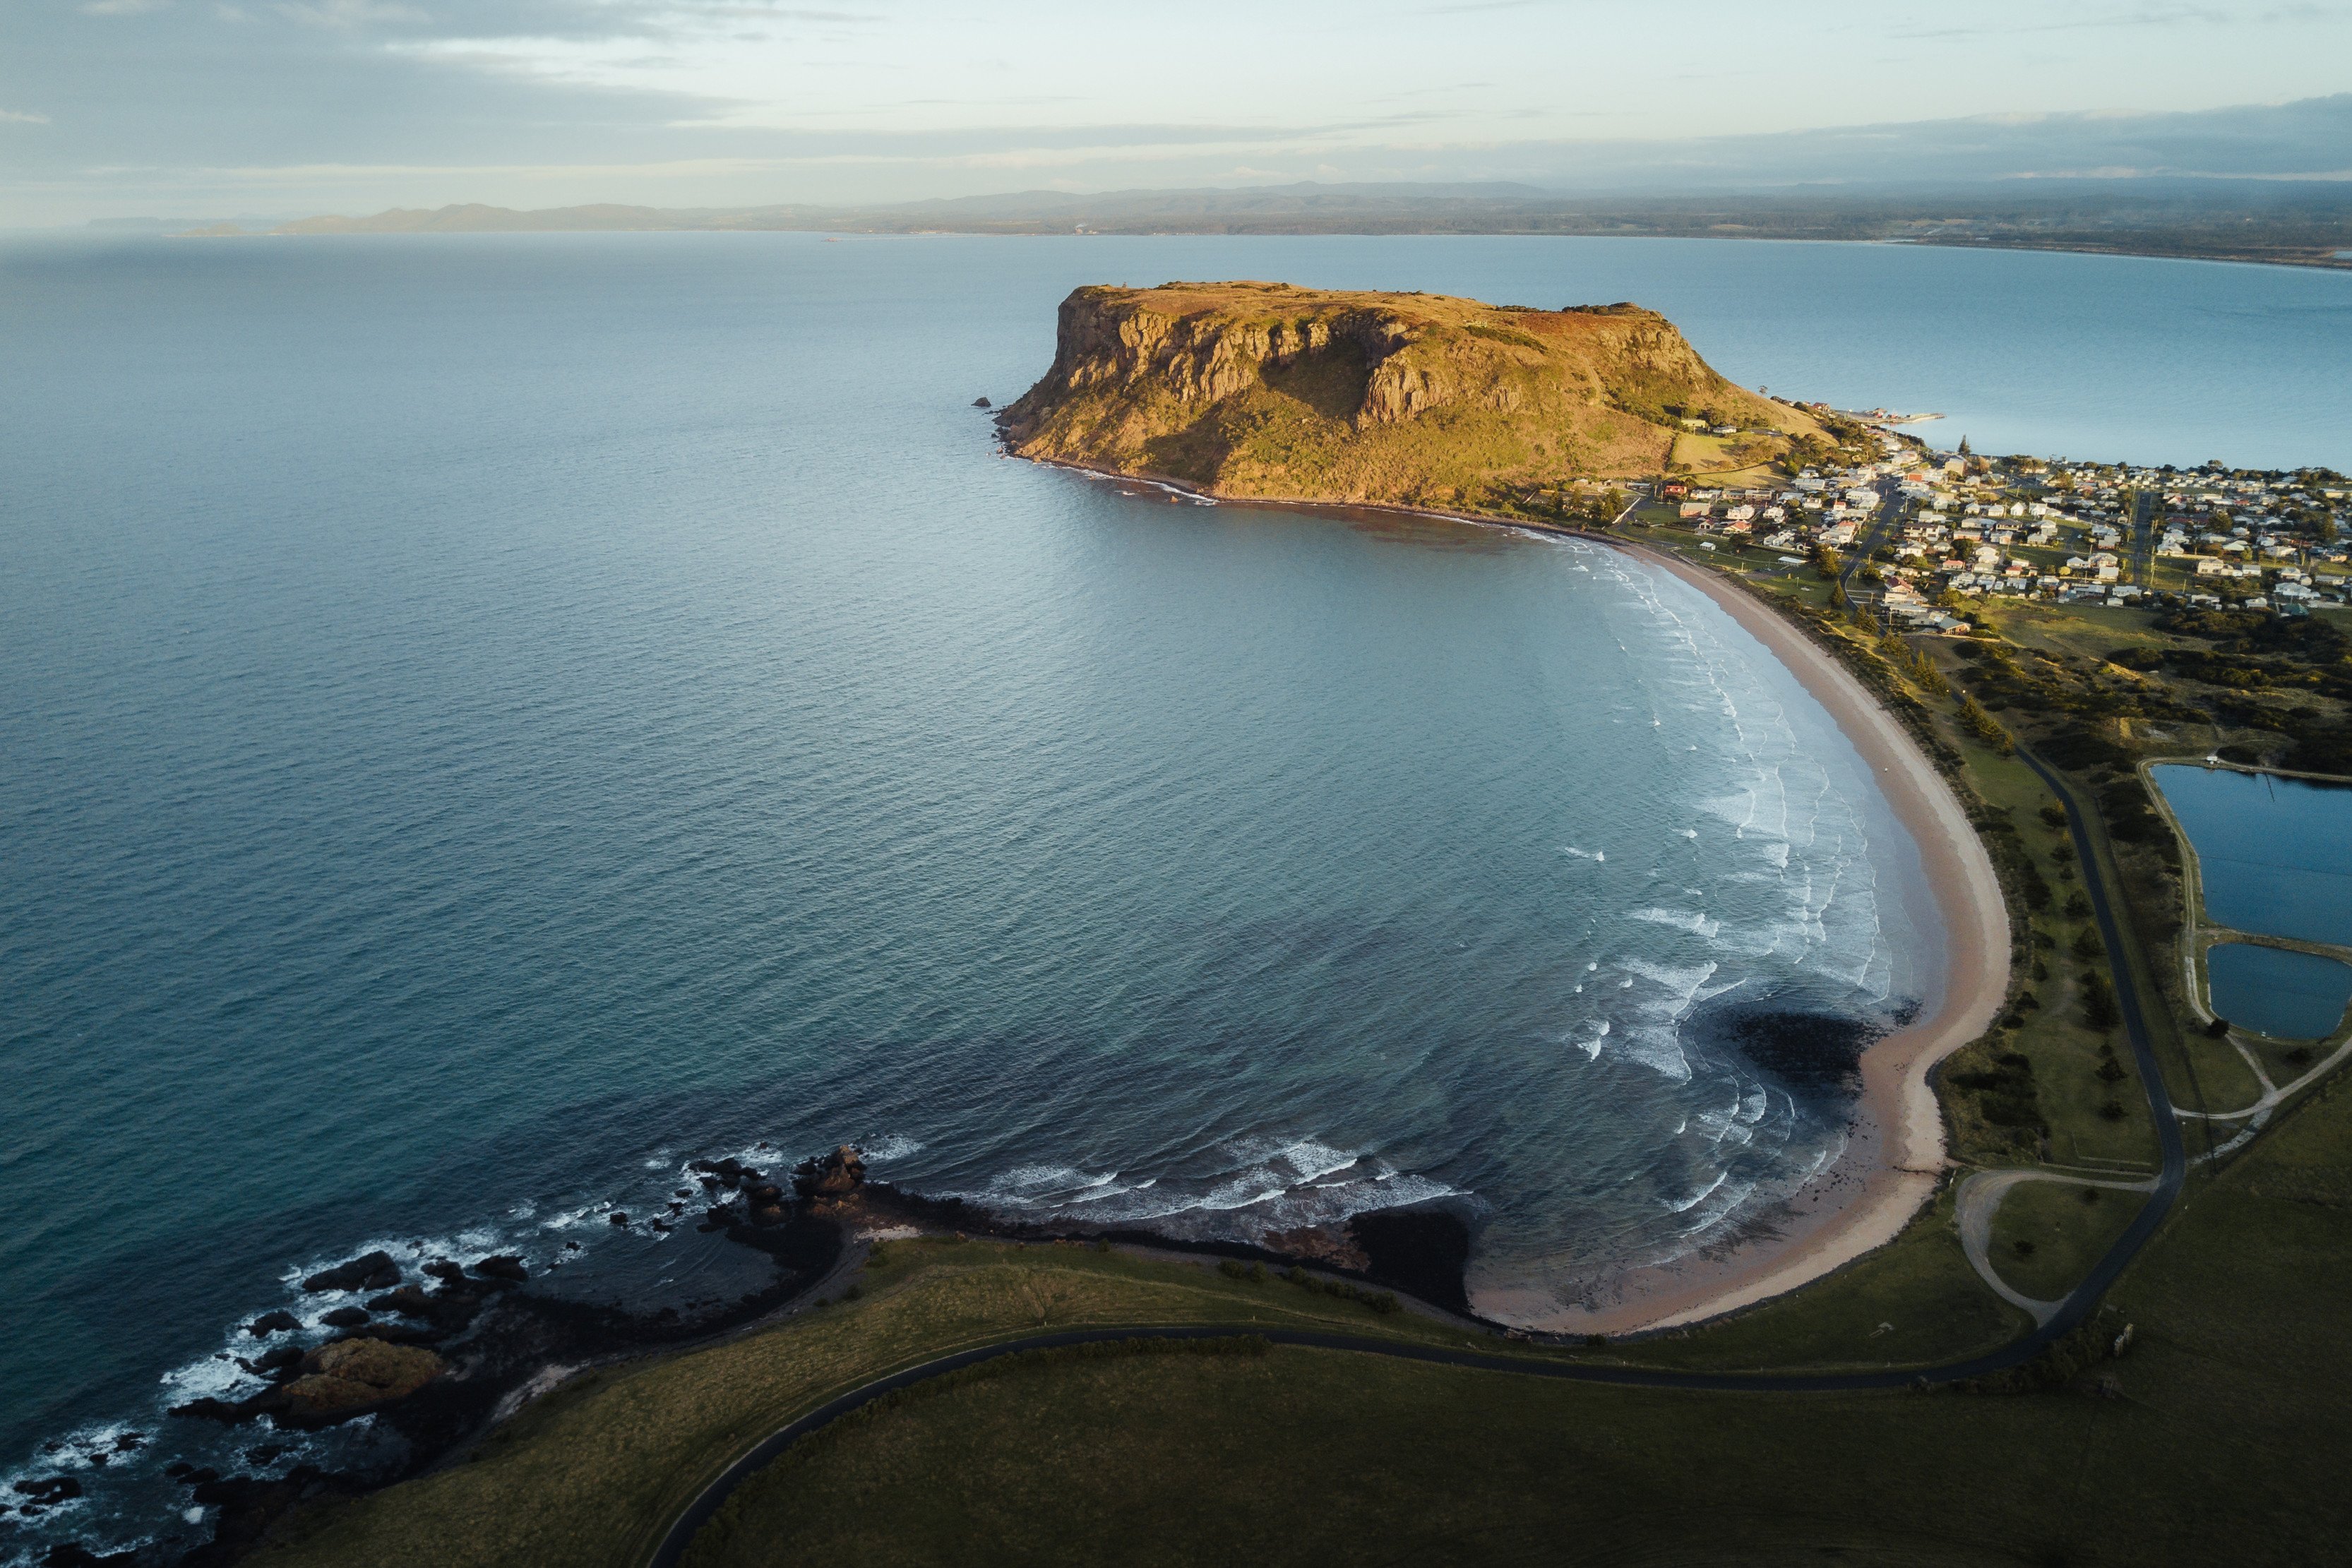 Aerial image of the stunning coastline with The Nut, a sheer-sided bluff, with the village of Stanley, nestled at the base of it